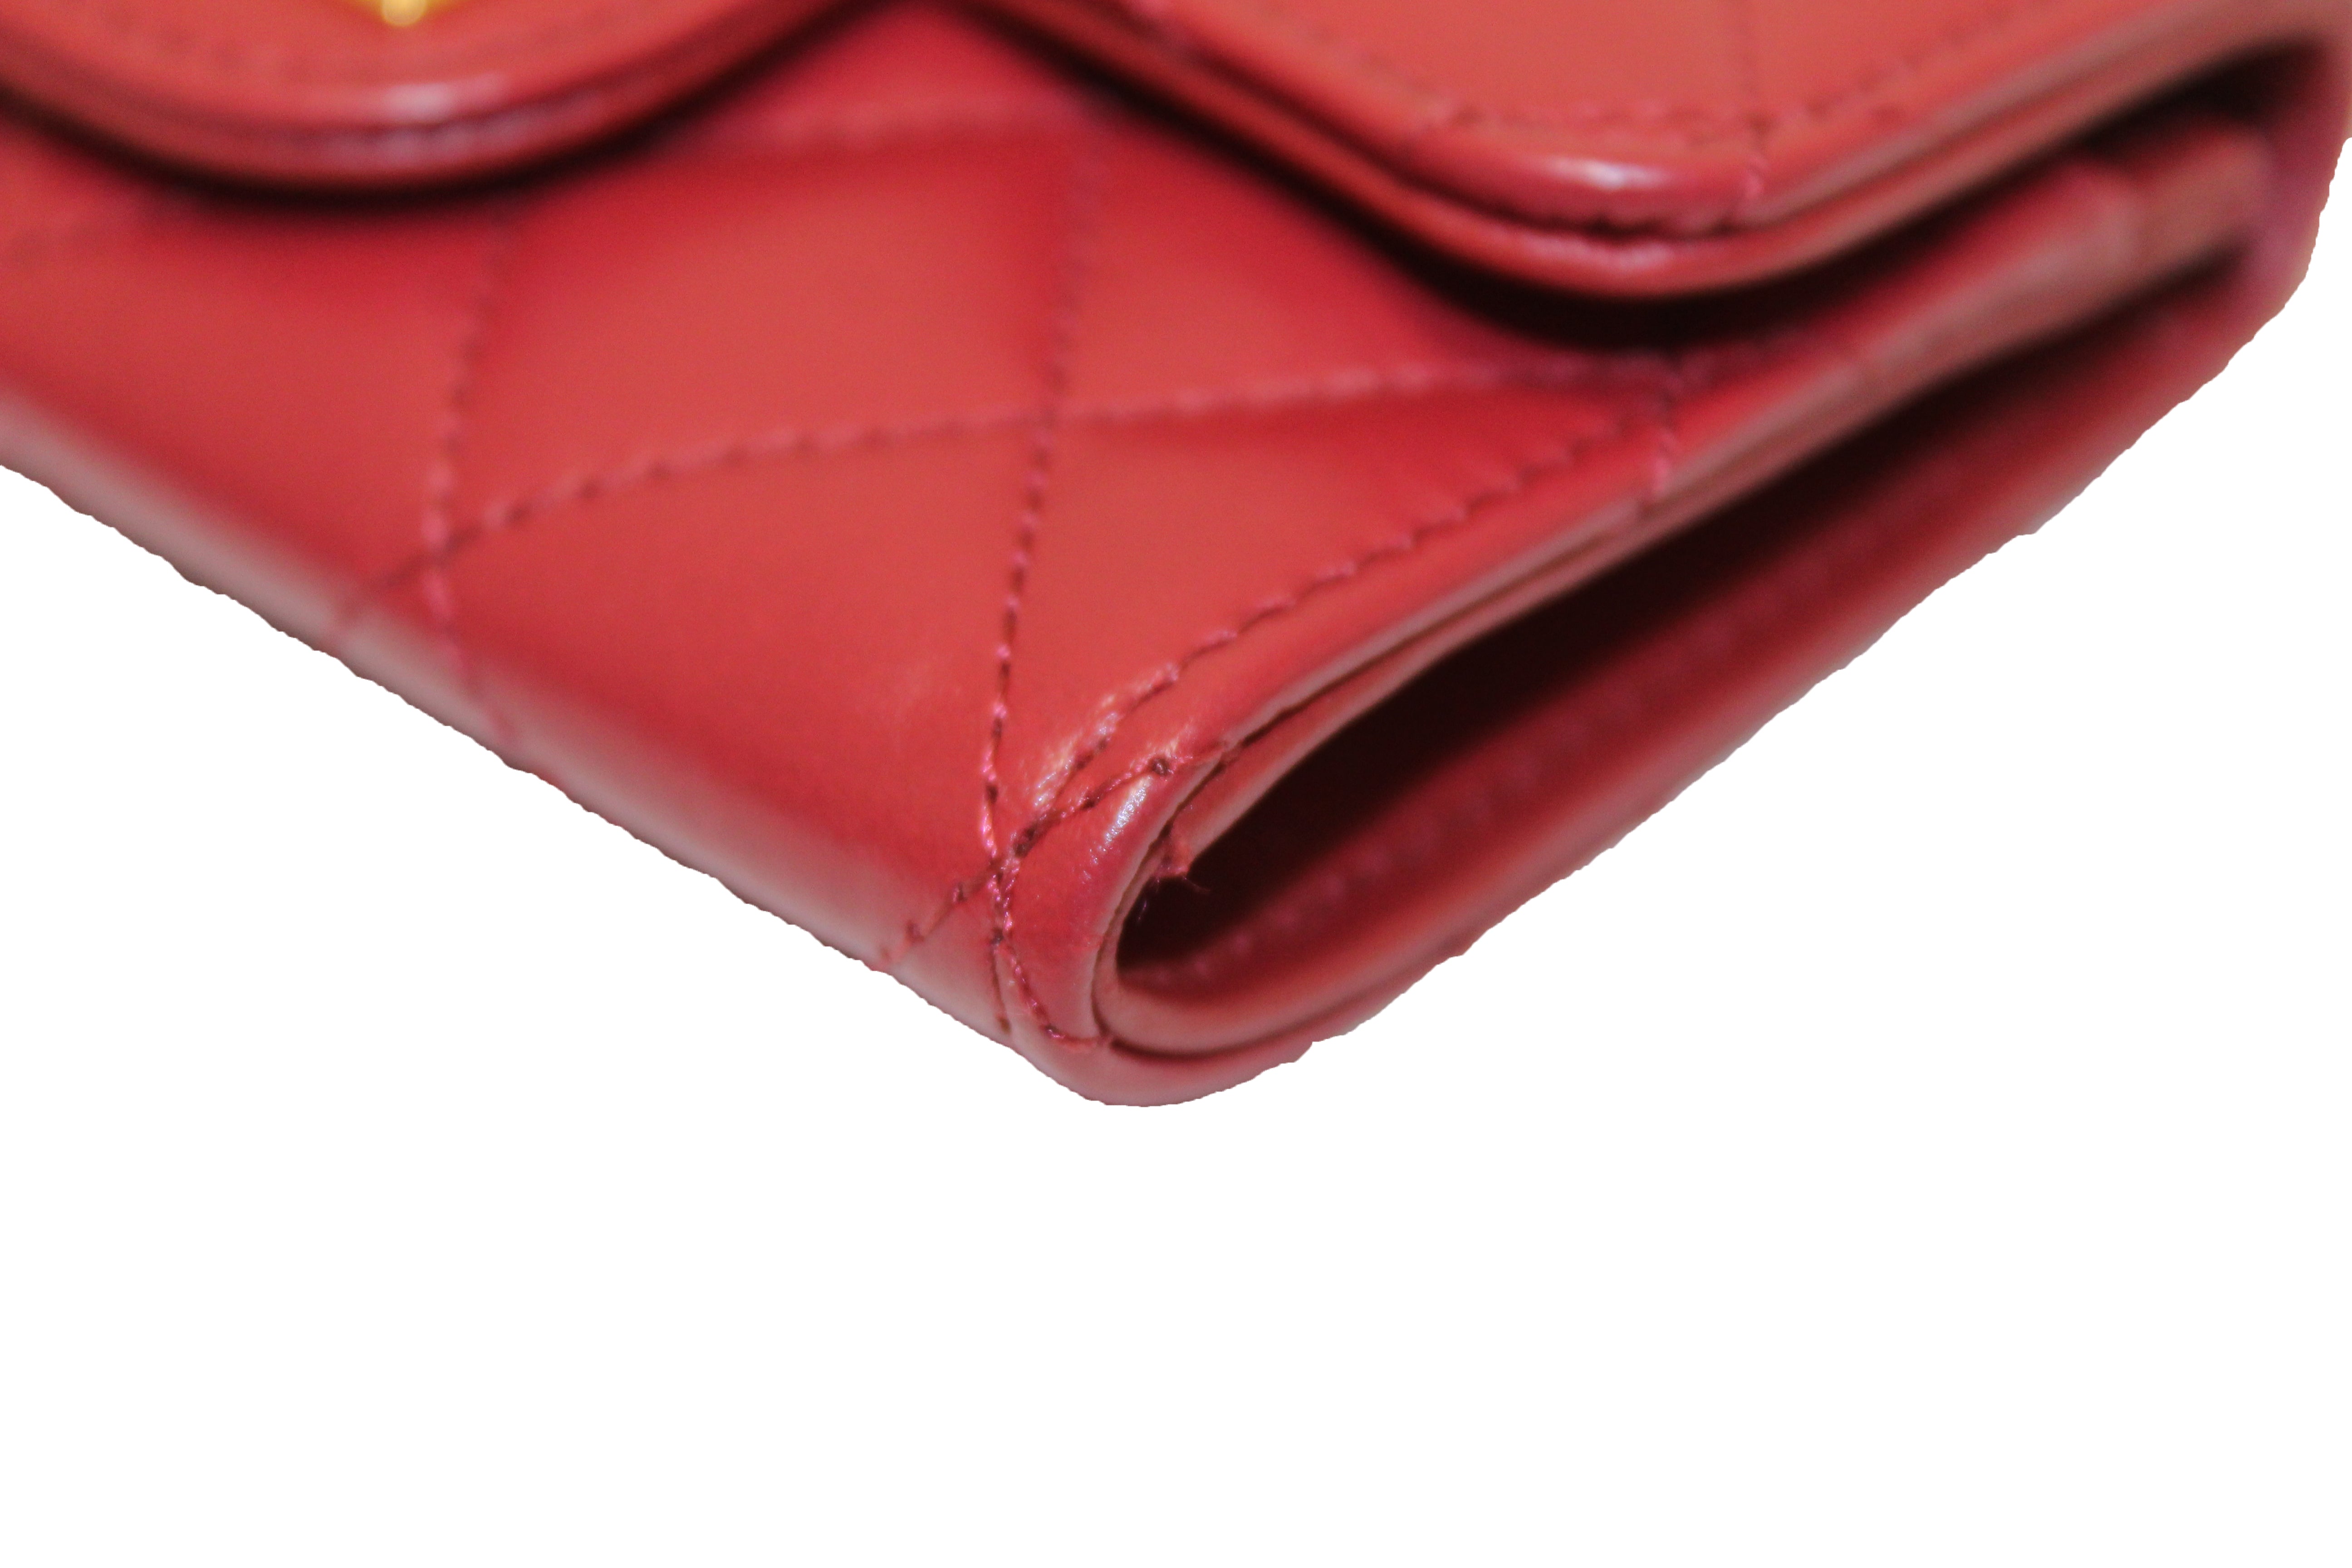 Authentic Chanel Quilted Red Calfskin Leather Reissue Flap Card Holder